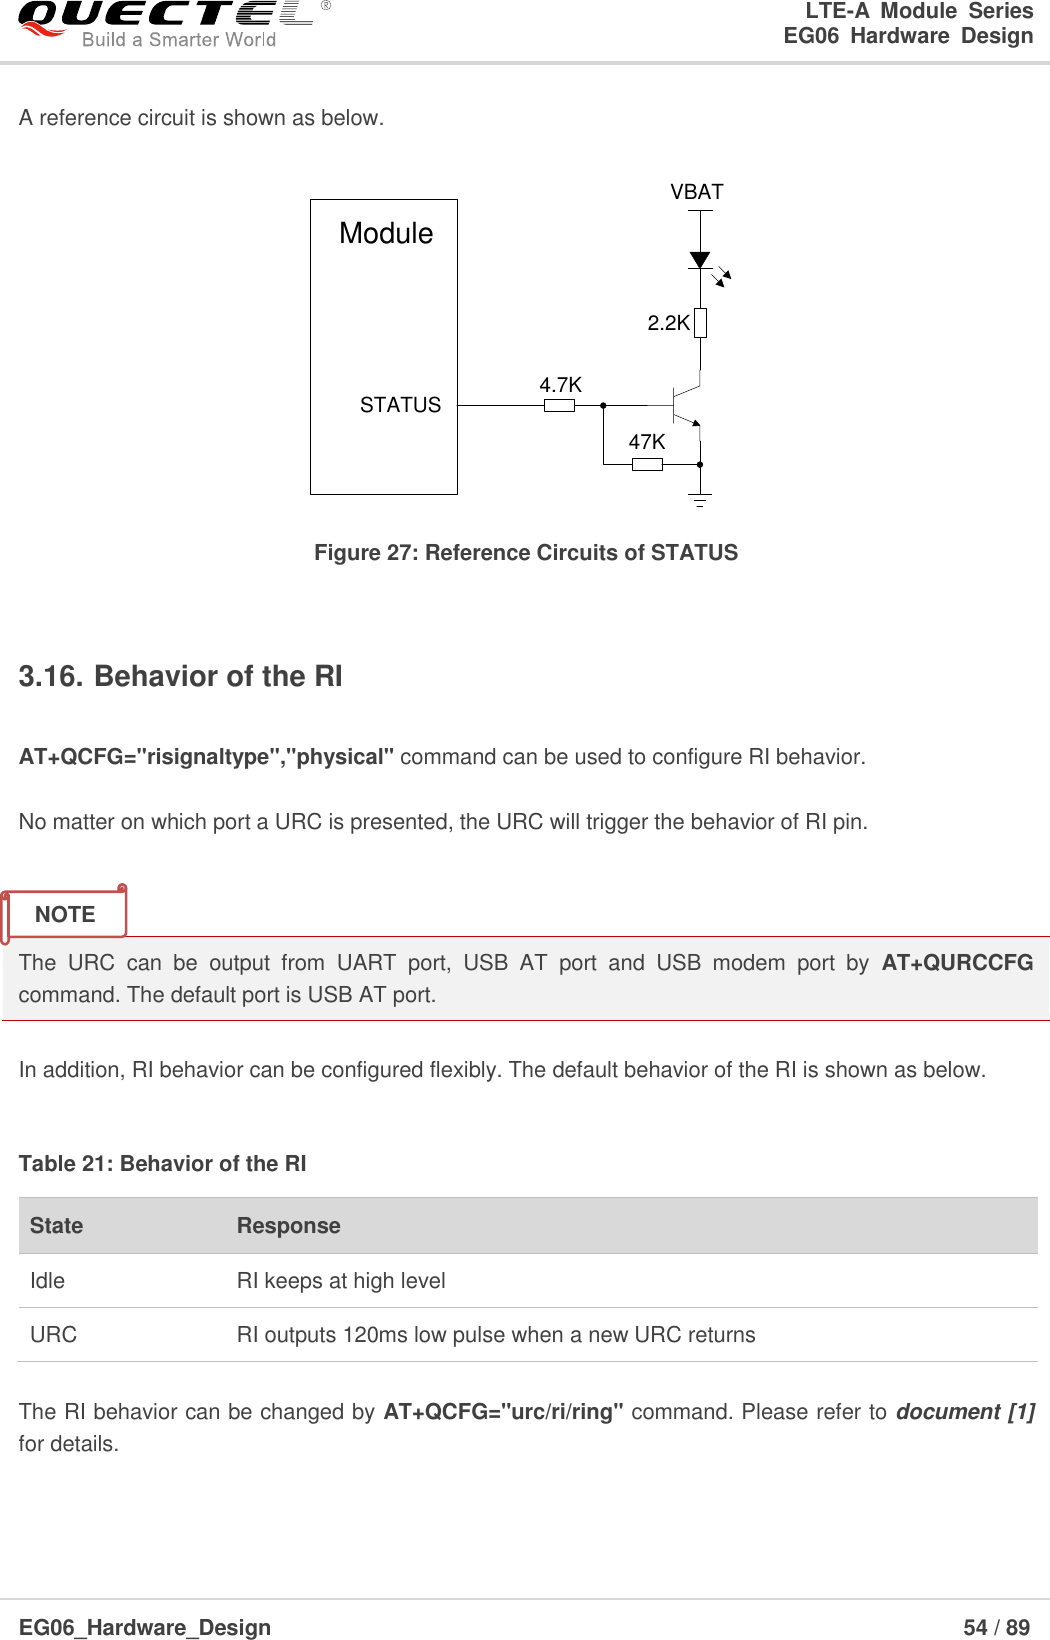 LTE-A  Module  Series                                                  EG06  Hardware  Design  EG06_Hardware_Design                                                               54 / 89    A reference circuit is shown as below.   4.7K47KVBAT2.2KModule STATUS Figure 27: Reference Circuits of STATUS  3.16. Behavior of the RI  AT+QCFG=&quot;risignaltype&quot;,&quot;physical&quot; command can be used to configure RI behavior.  No matter on which port a URC is presented, the URC will trigger the behavior of RI pin.   The  URC  can  be  output  from  UART  port,  USB  AT  port  and  USB  modem  port  by  AT+QURCCFG command. The default port is USB AT port.  In addition, RI behavior can be configured flexibly. The default behavior of the RI is shown as below.  Table 21: Behavior of the RI State Response Idle RI keeps at high level URC RI outputs 120ms low pulse when a new URC returns  The RI behavior can be changed by AT+QCFG=&quot;urc/ri/ring&quot; command. Please refer to document [1] for details.  NOTE 